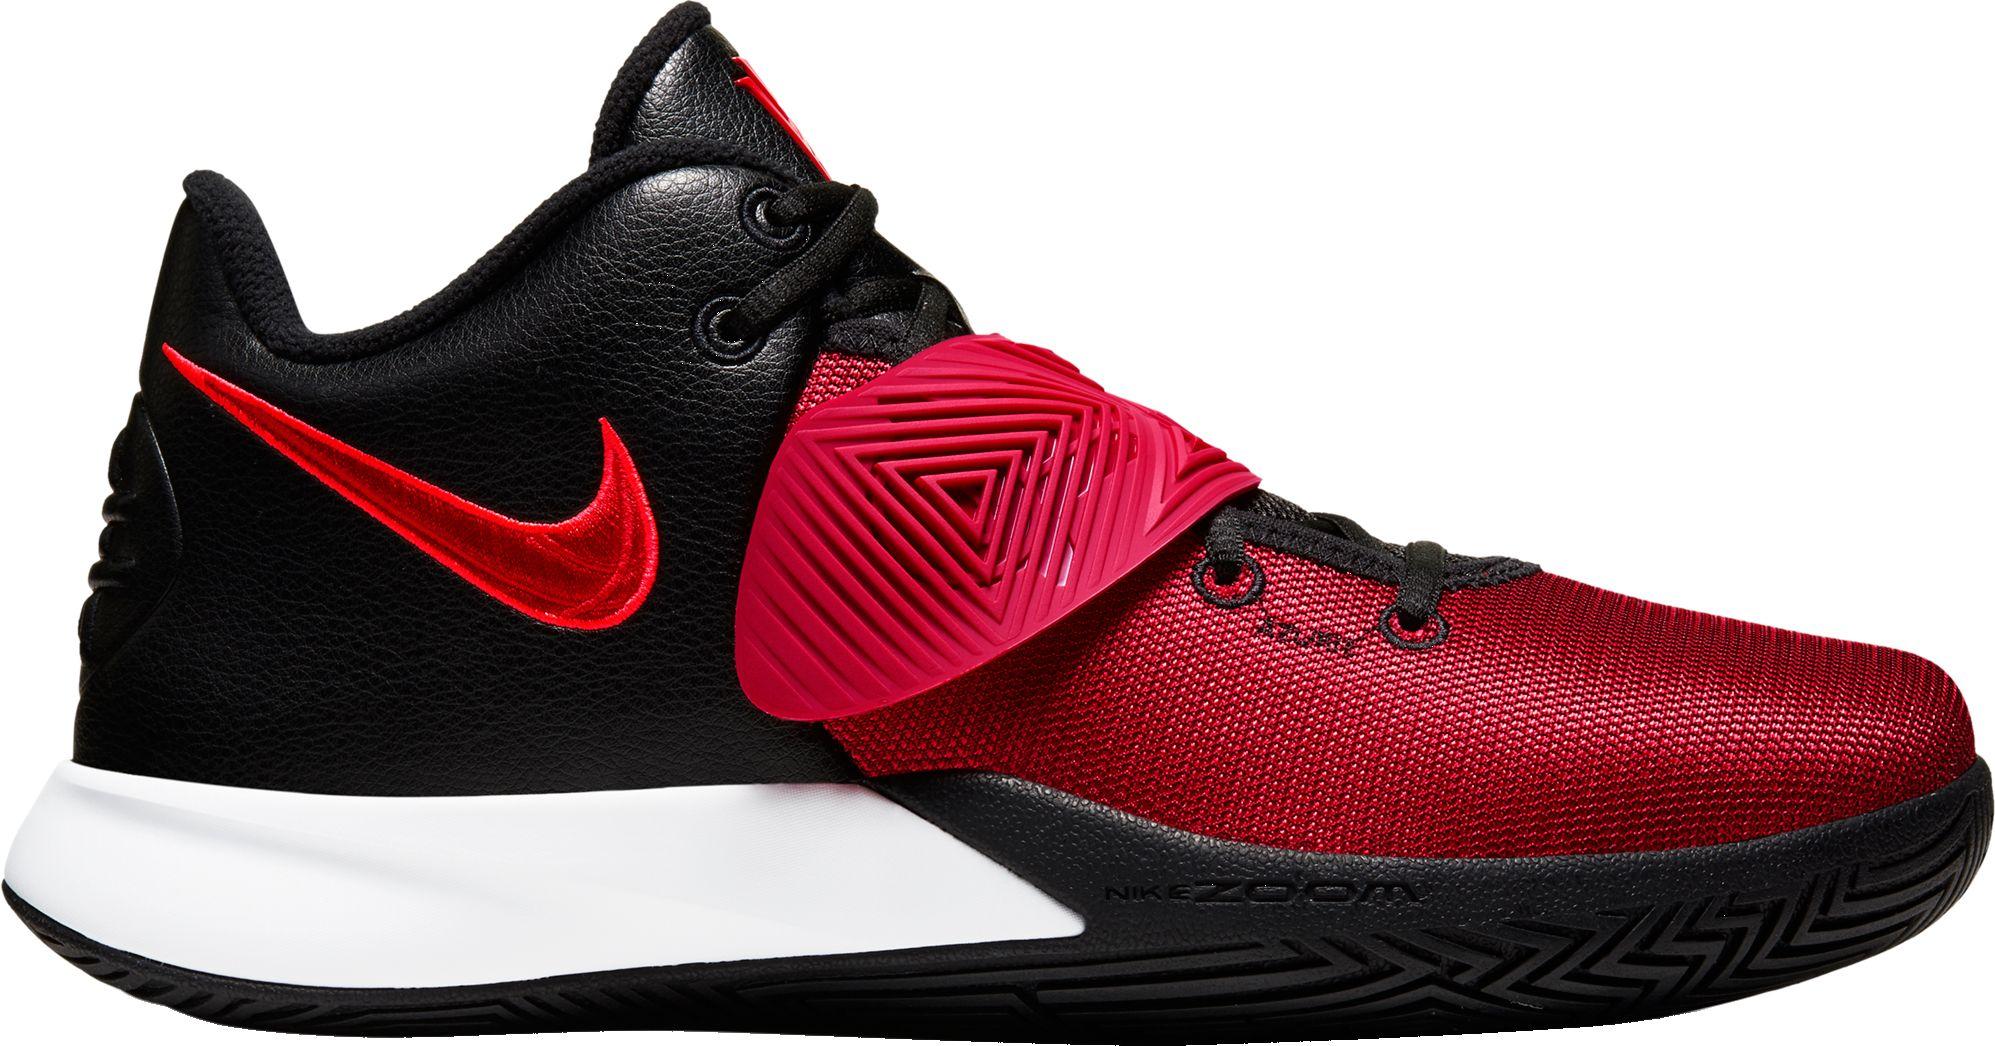 kyrie flytrap 3 red and black